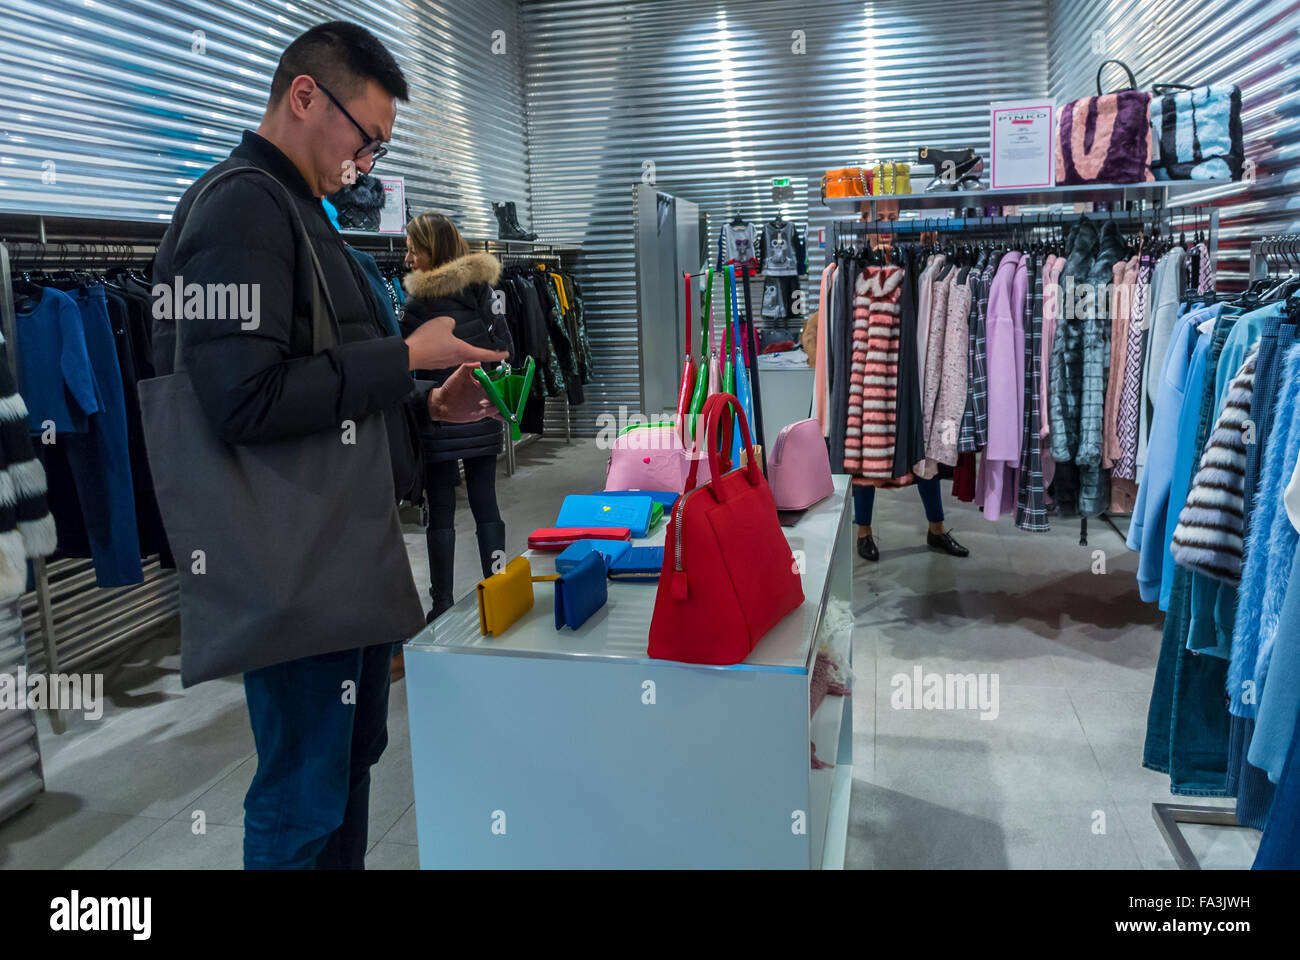 Europe is still a bargain for luxury shoppers